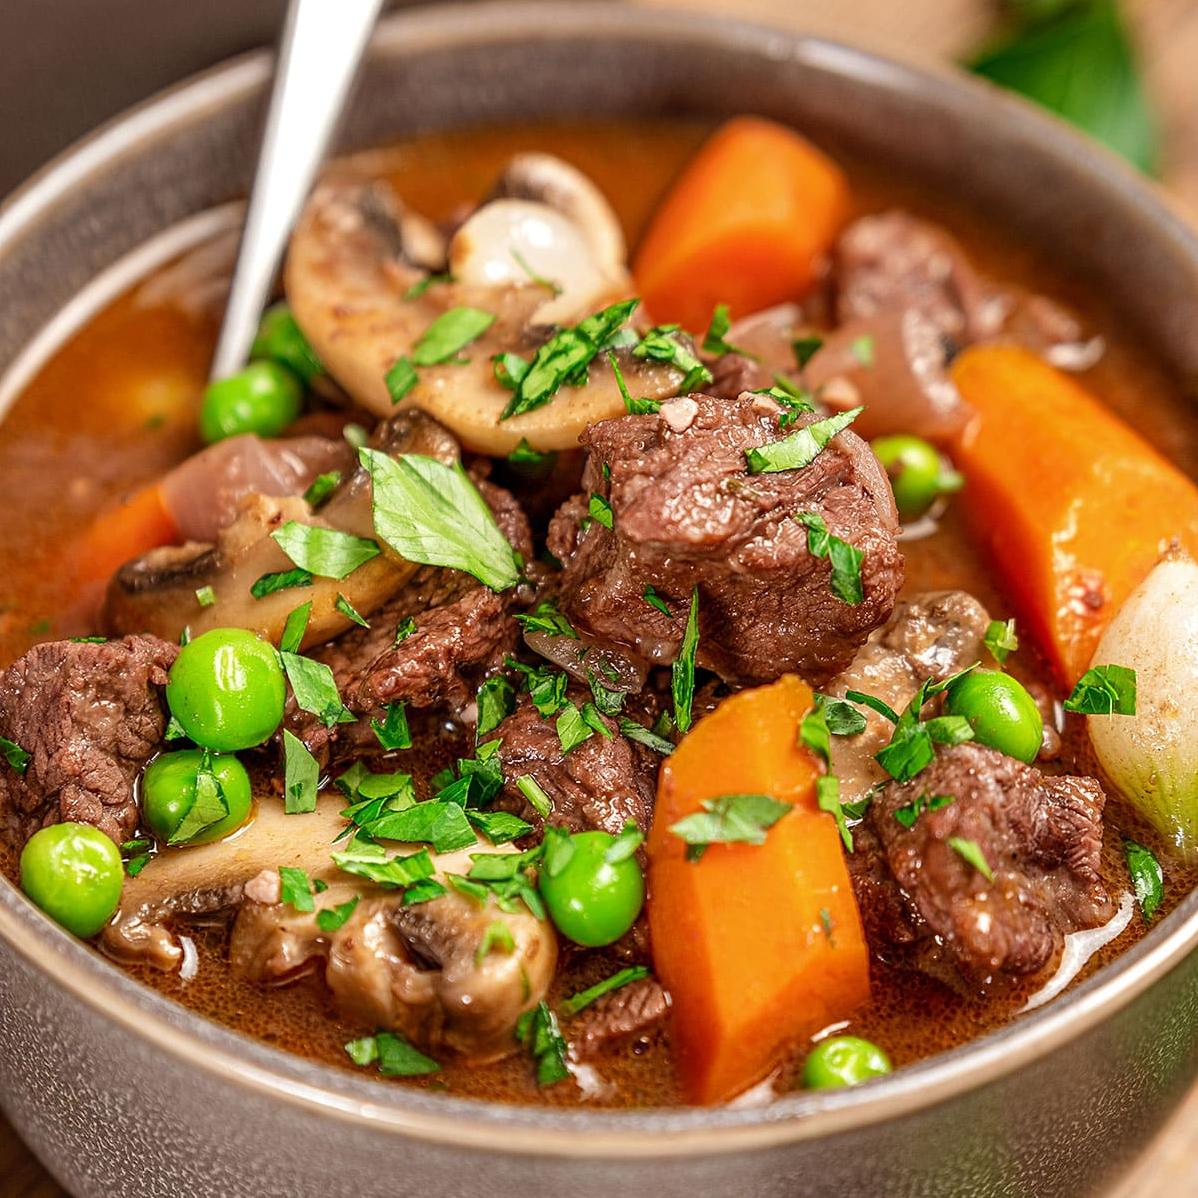  Savor the aroma of this hearty beef stew simmering in red wine.